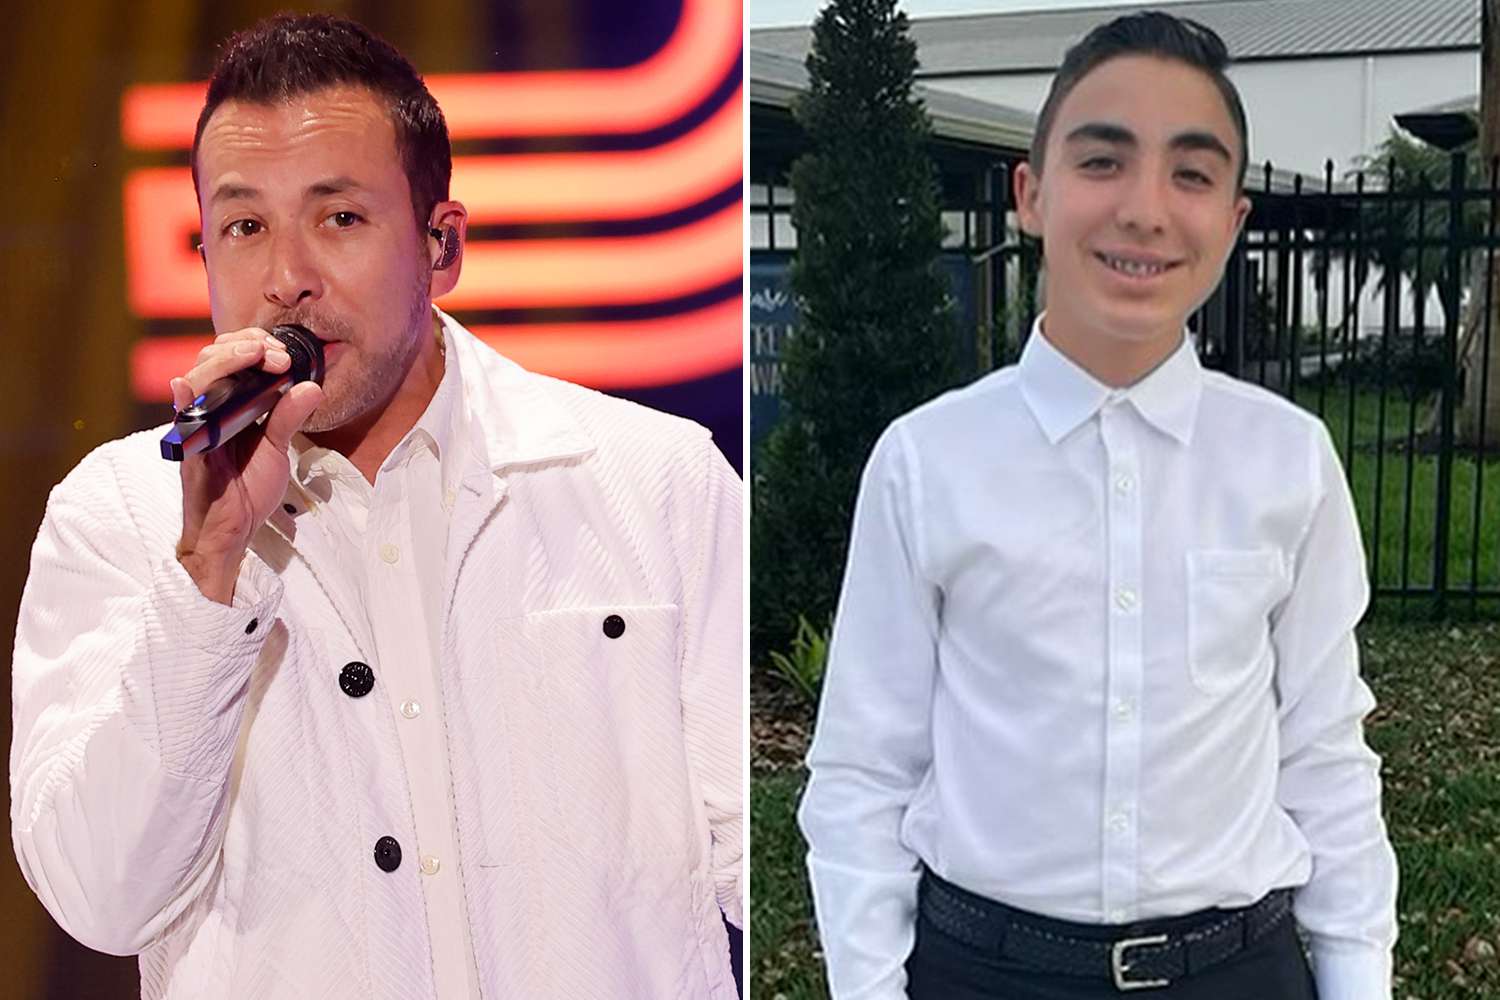 Howie Dorough Celebrates Lookalike Son James on His 14th Birthday: 'What a Wonderful Young Man'